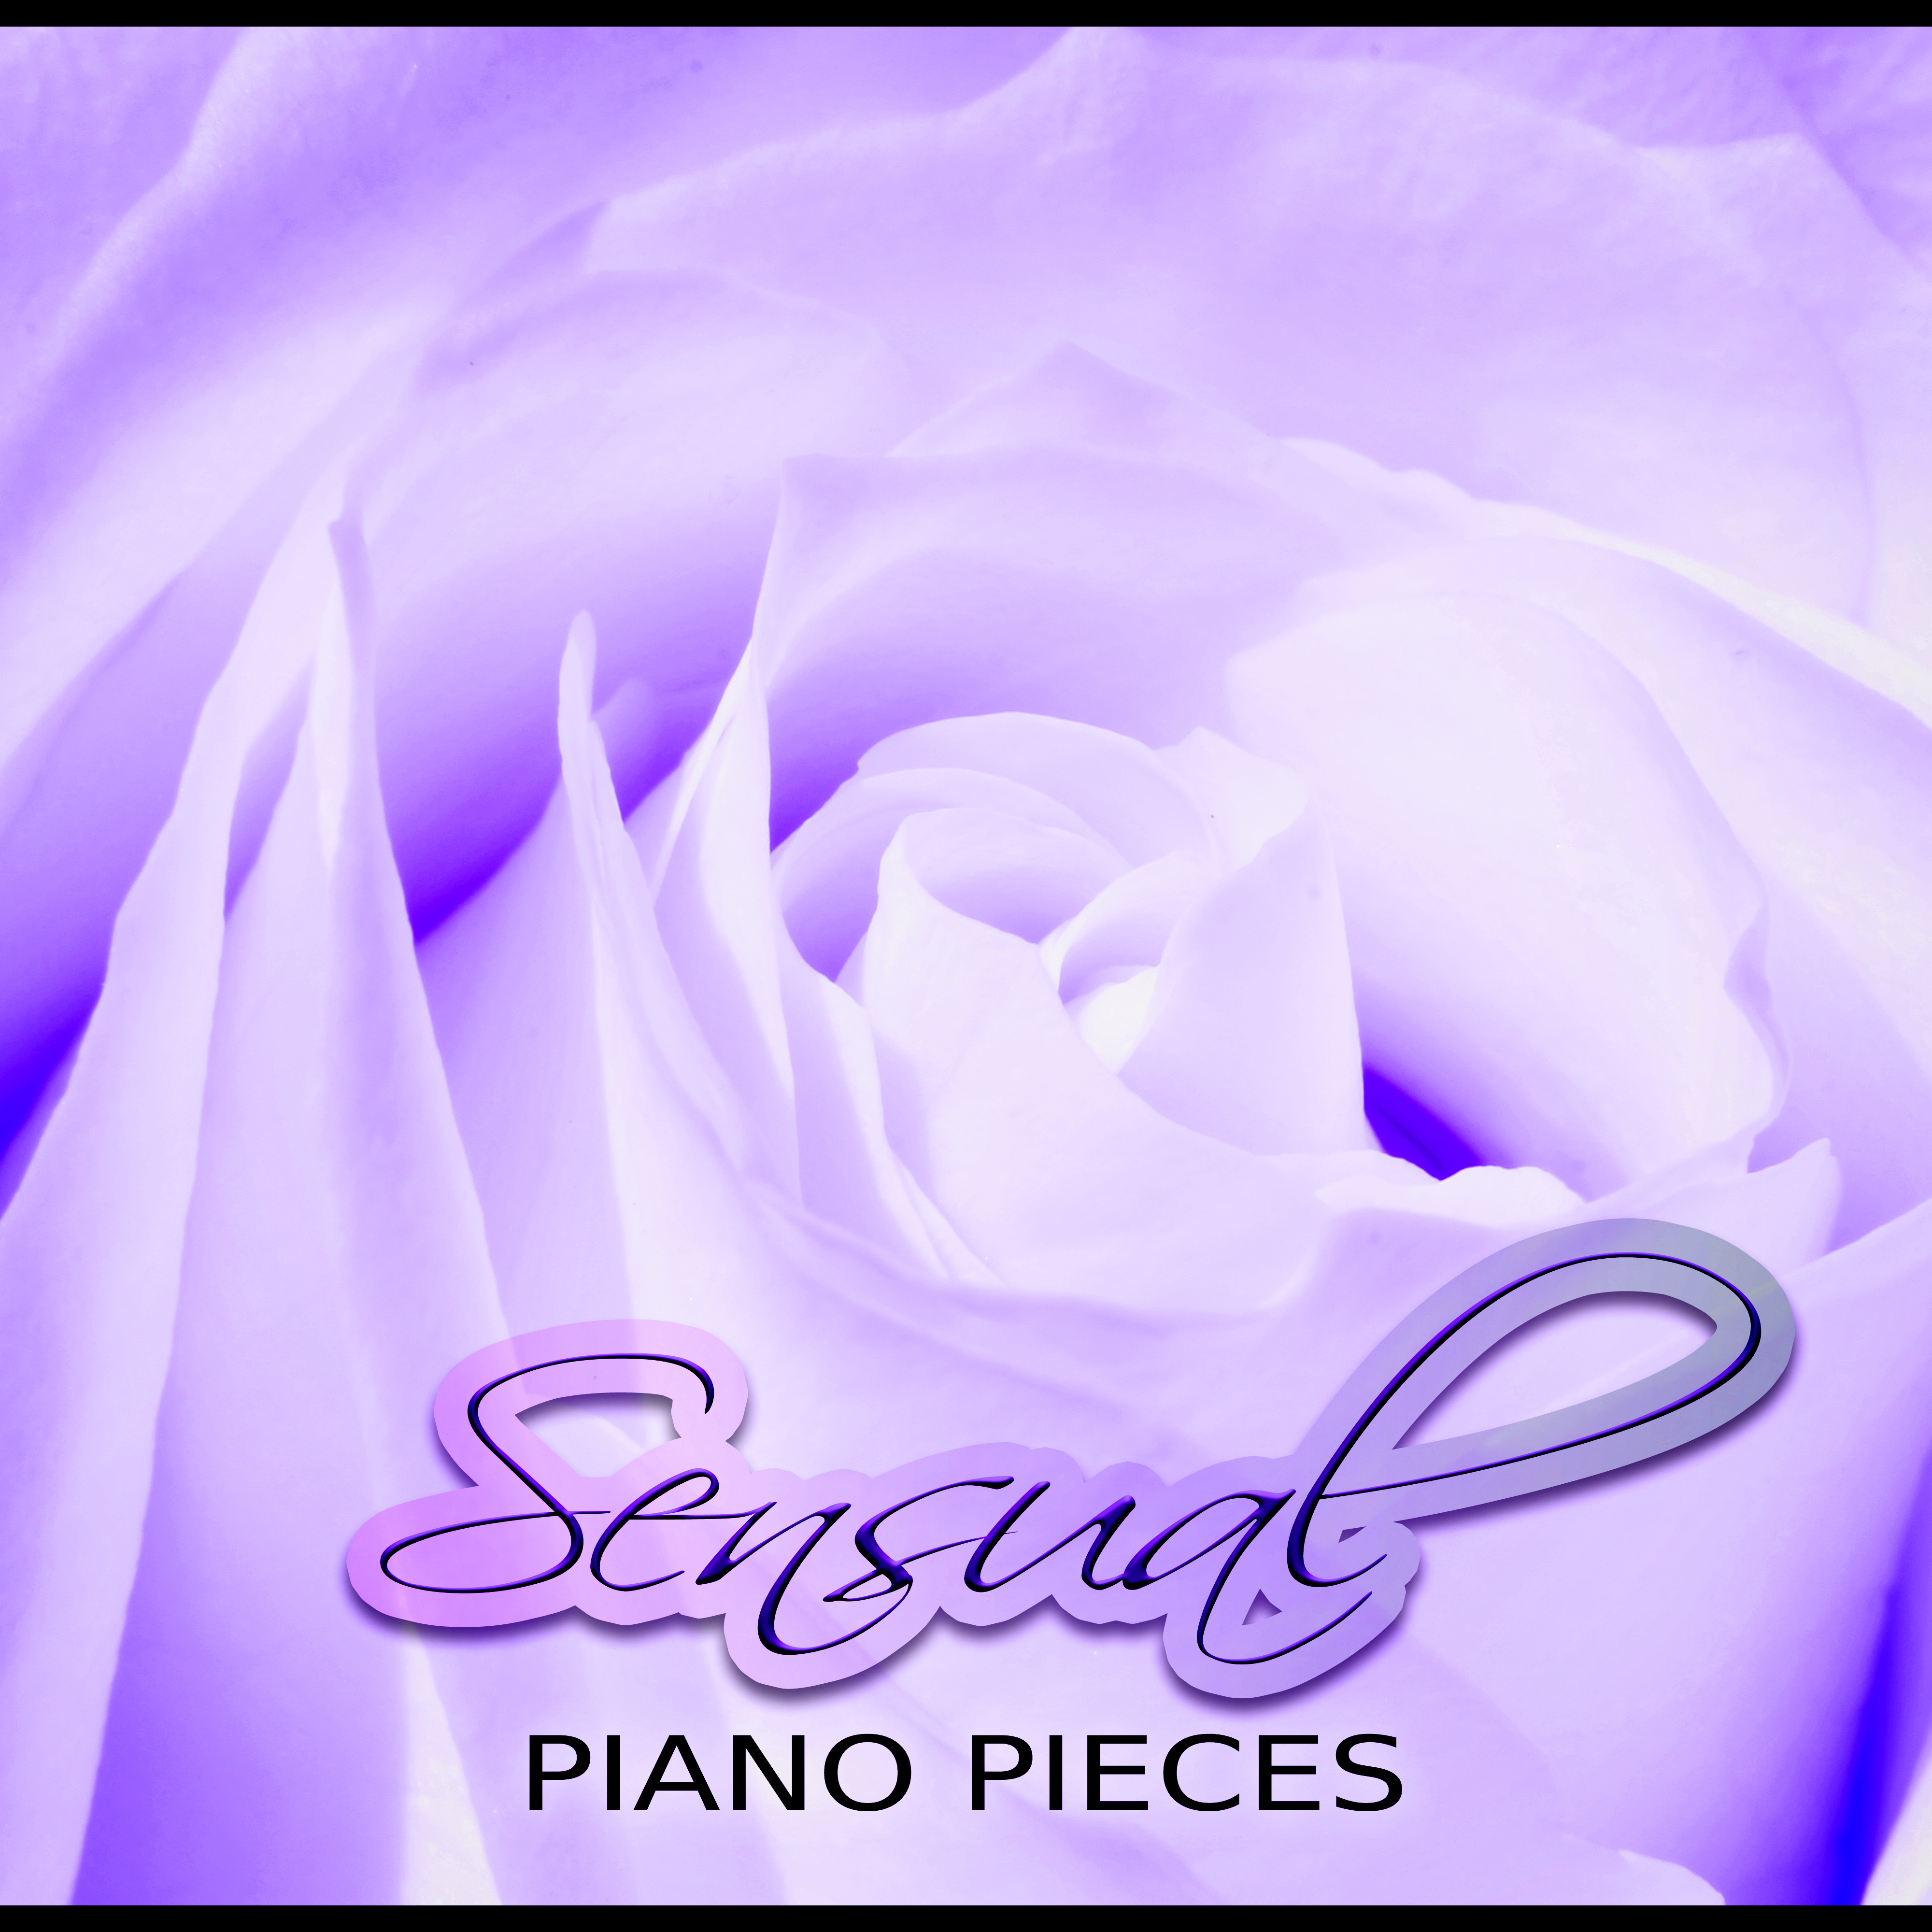 Sensual Piano Pieces - Beautiful Love Songs, Background Music for Sensual Massage, Intimate Moments, Romantic Candle Light Dinner, Essence of Love Music, Classical Piano